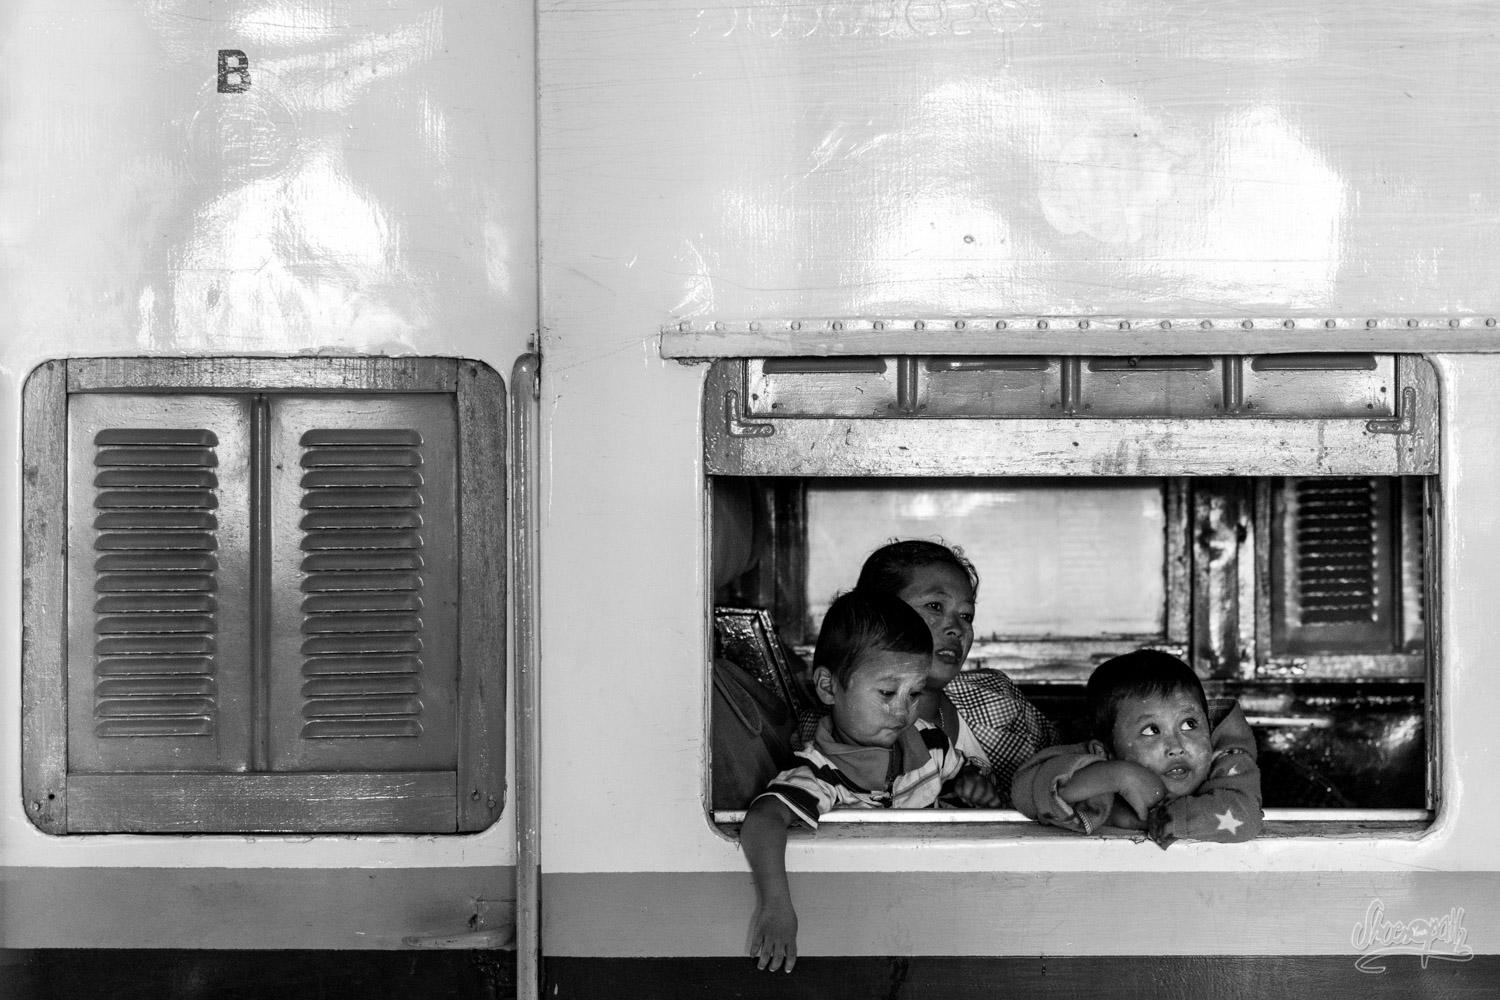 Waiting for departure... A familly in Mandalay train station